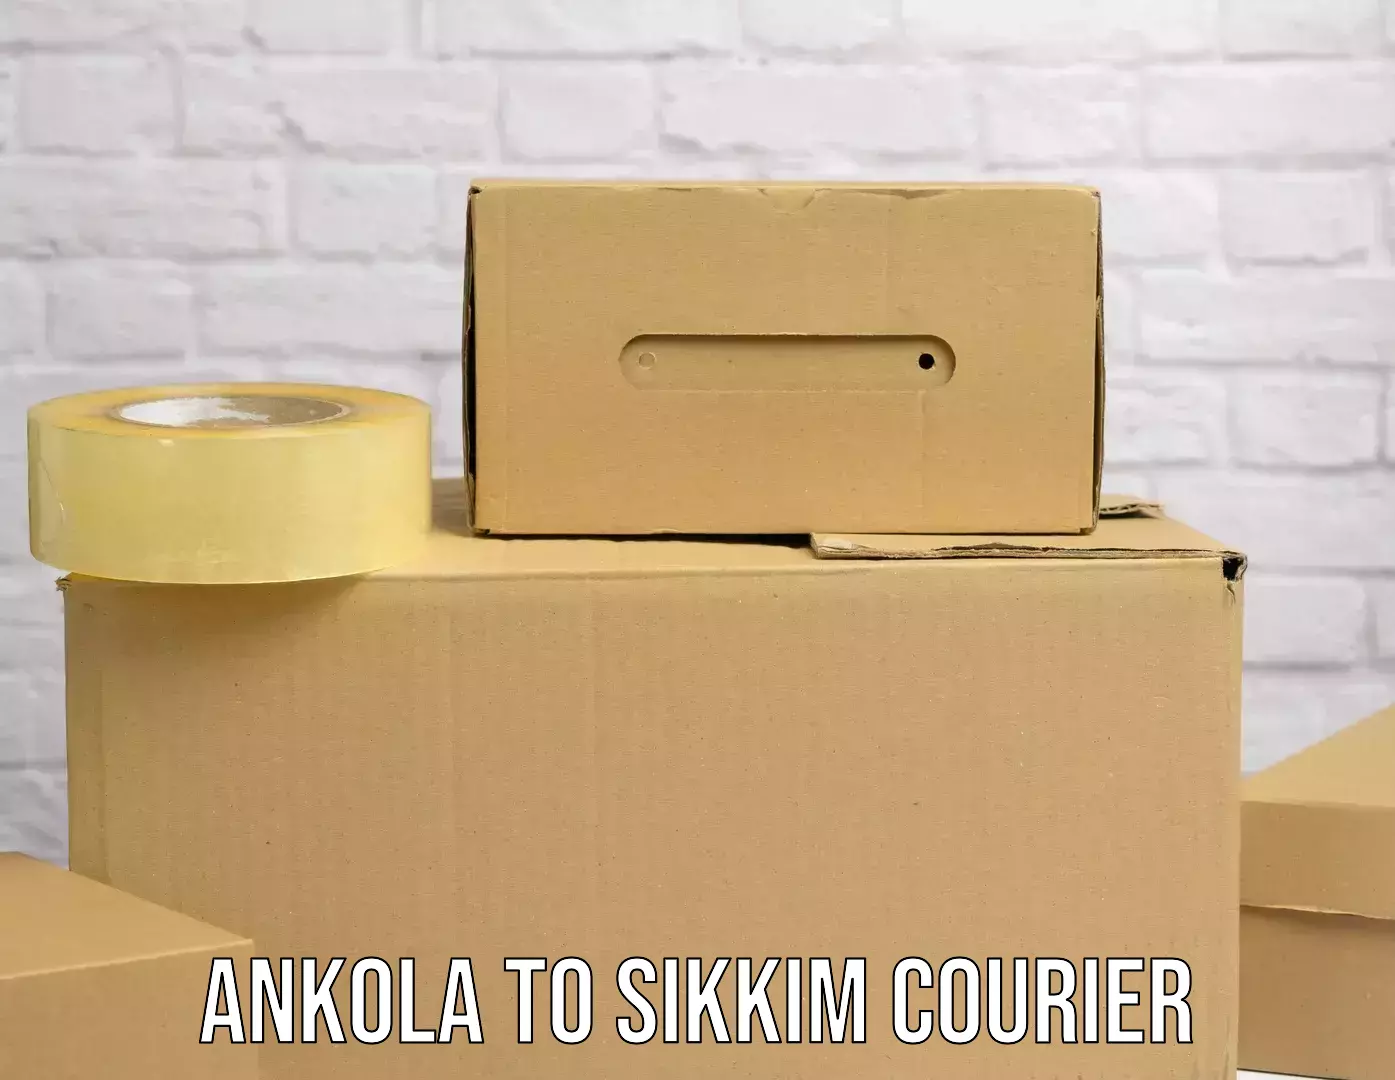 Automated shipping processes Ankola to Sikkim